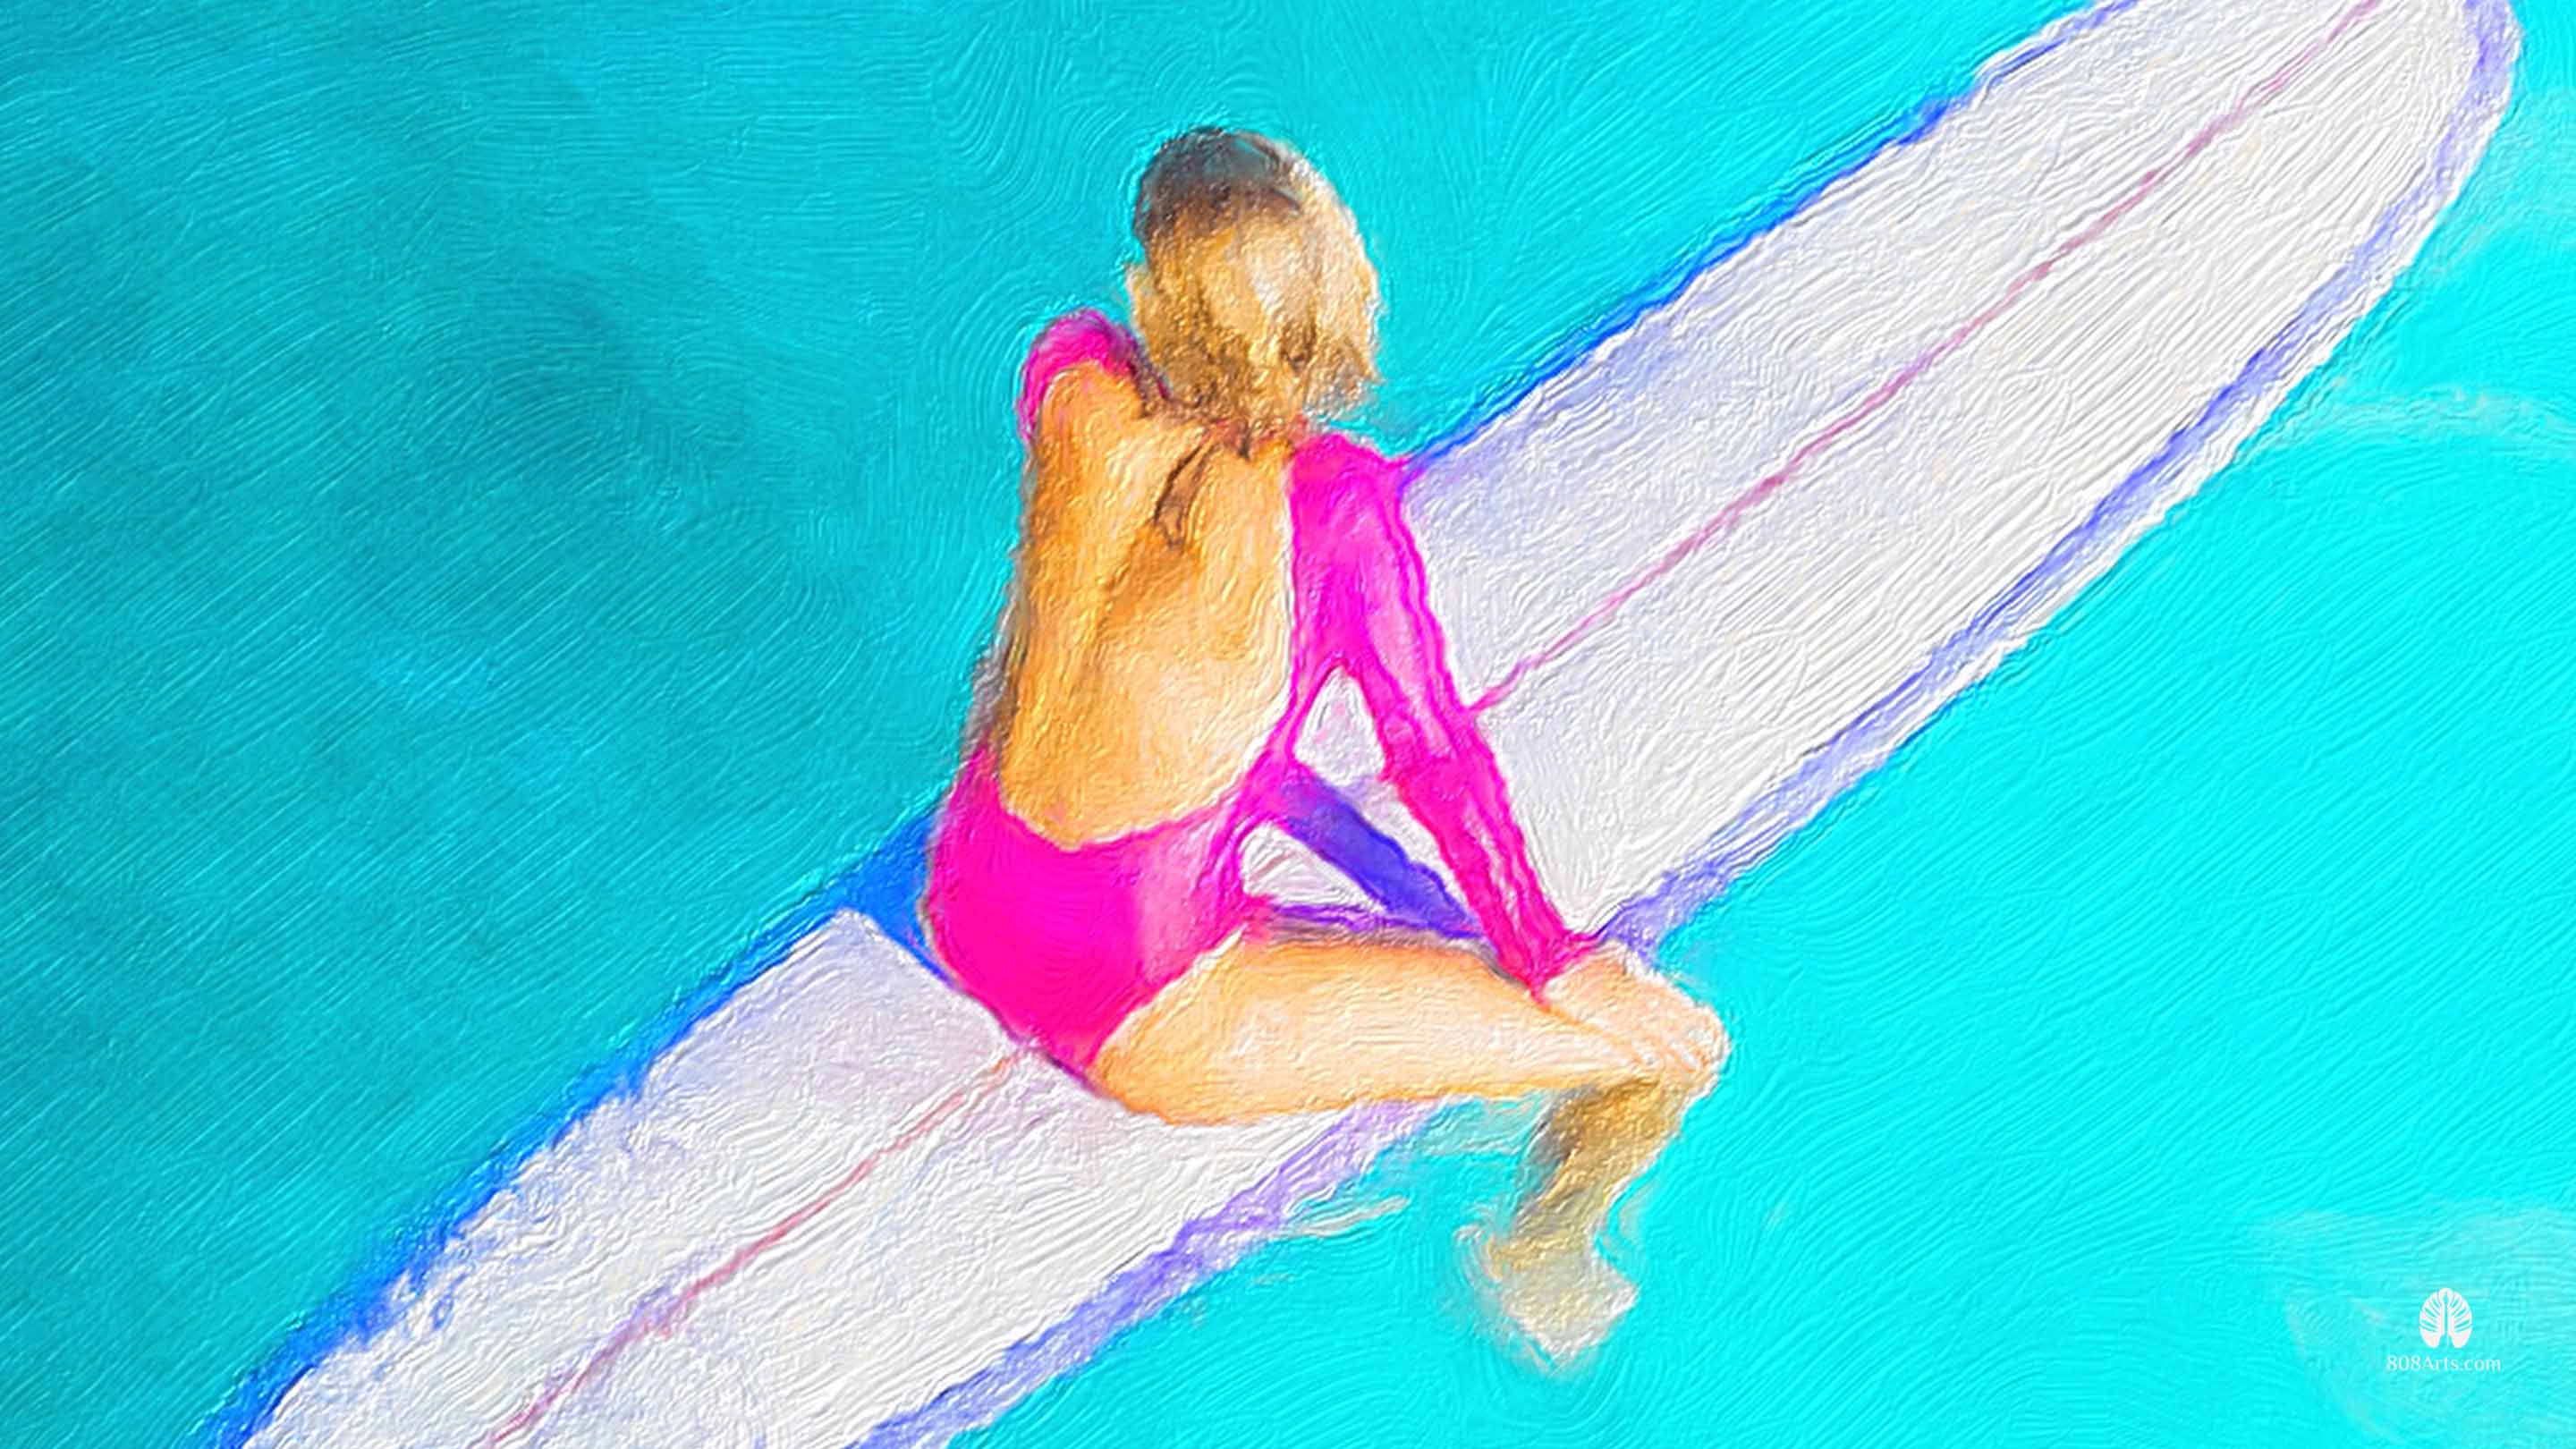 painting of woman in pink swimsuit on surfboard in hawaii ocean